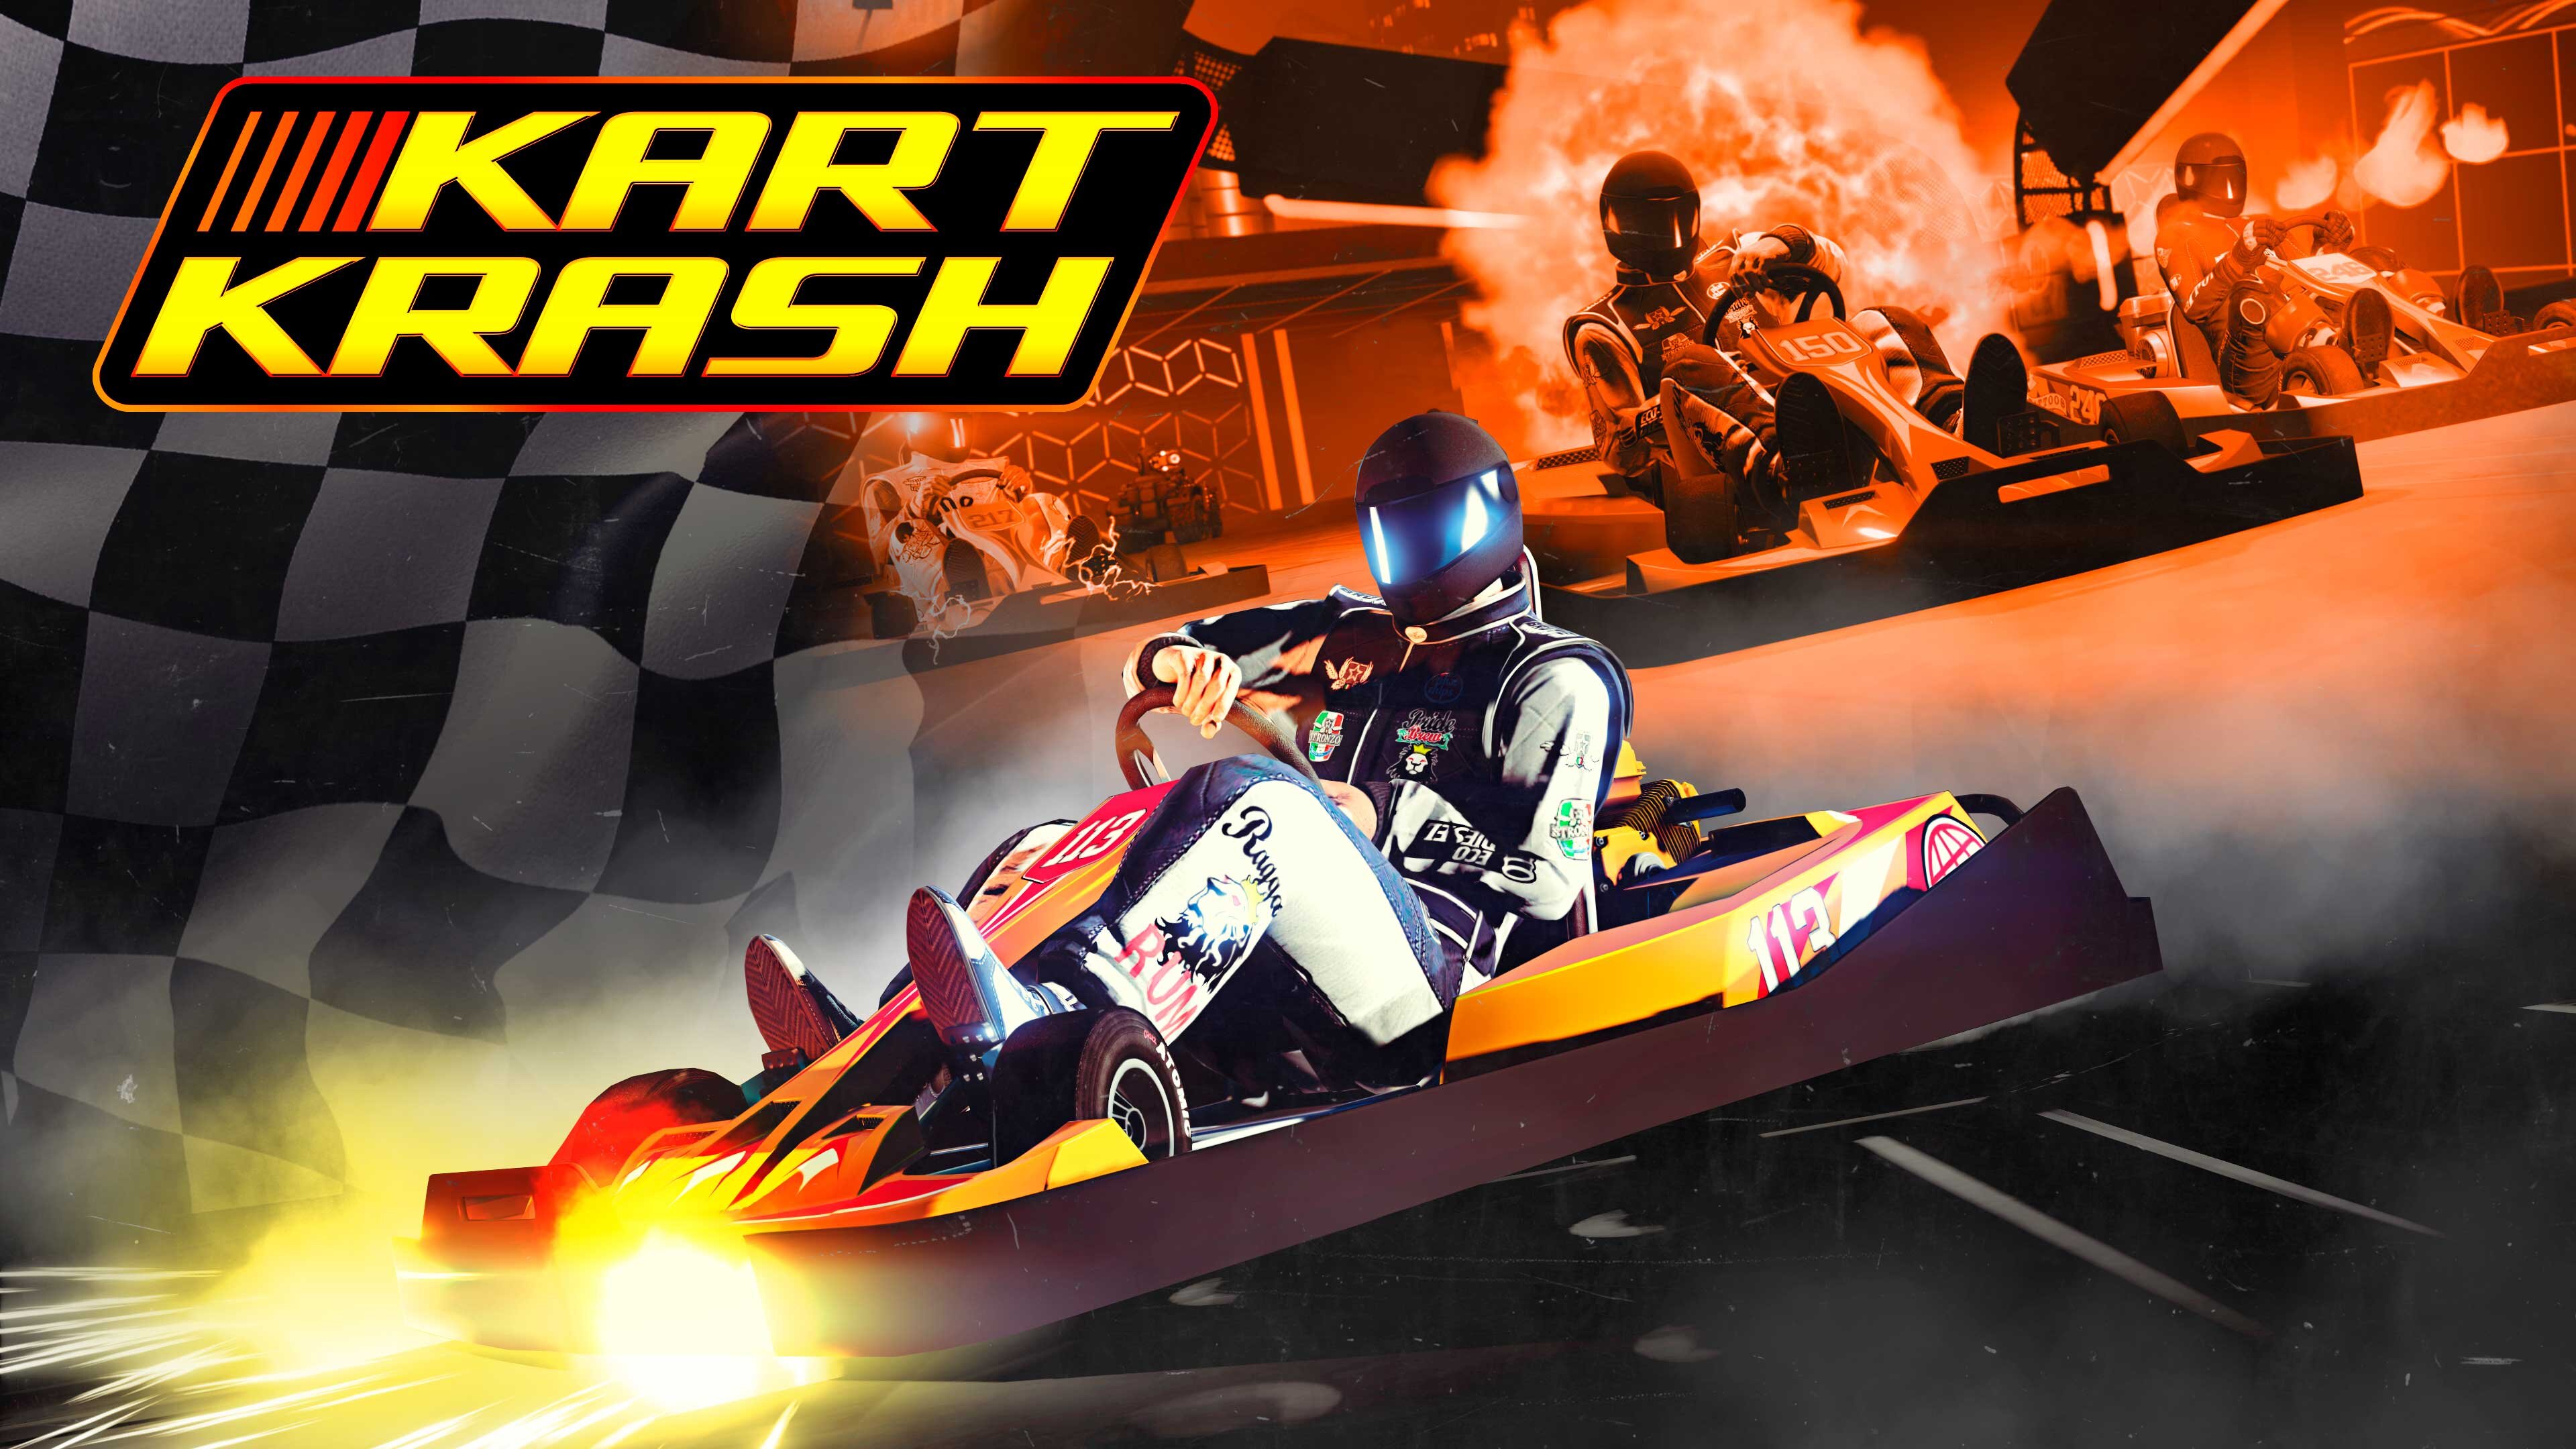 More information about "Kart Krash: Full Auto, Pfister Growler & Events in GTA Online"